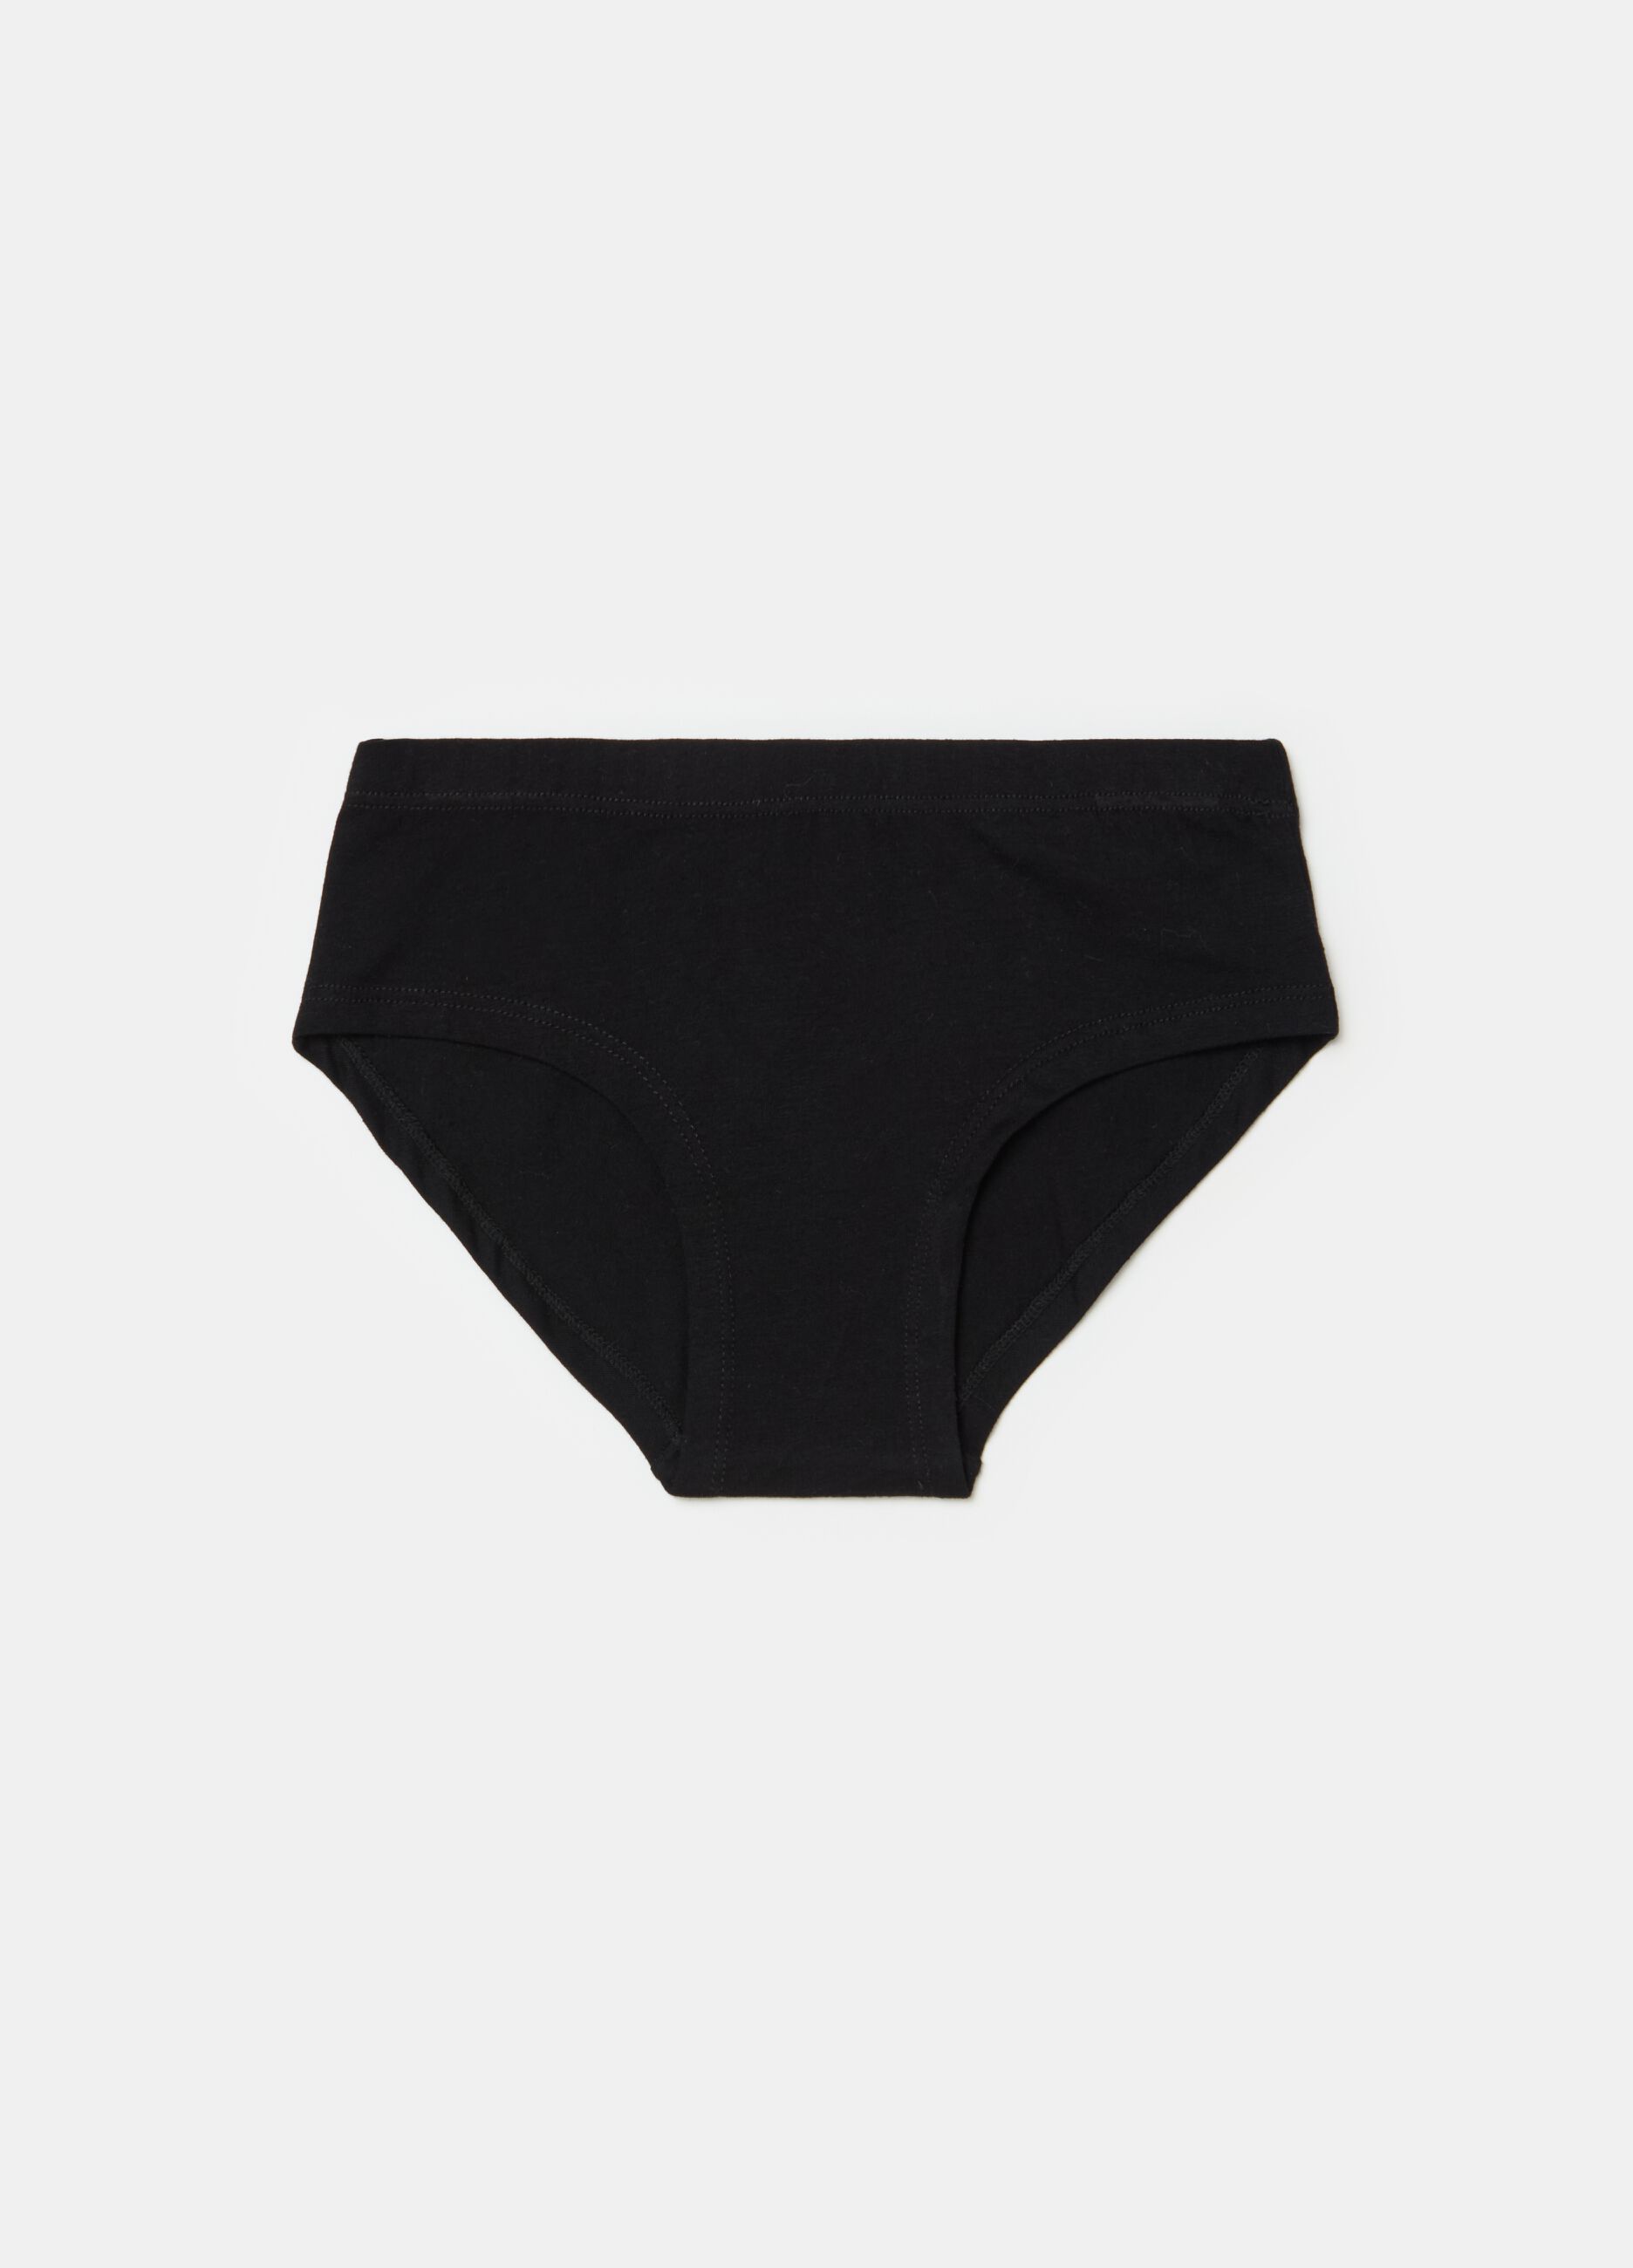 French knickers in organic cotton